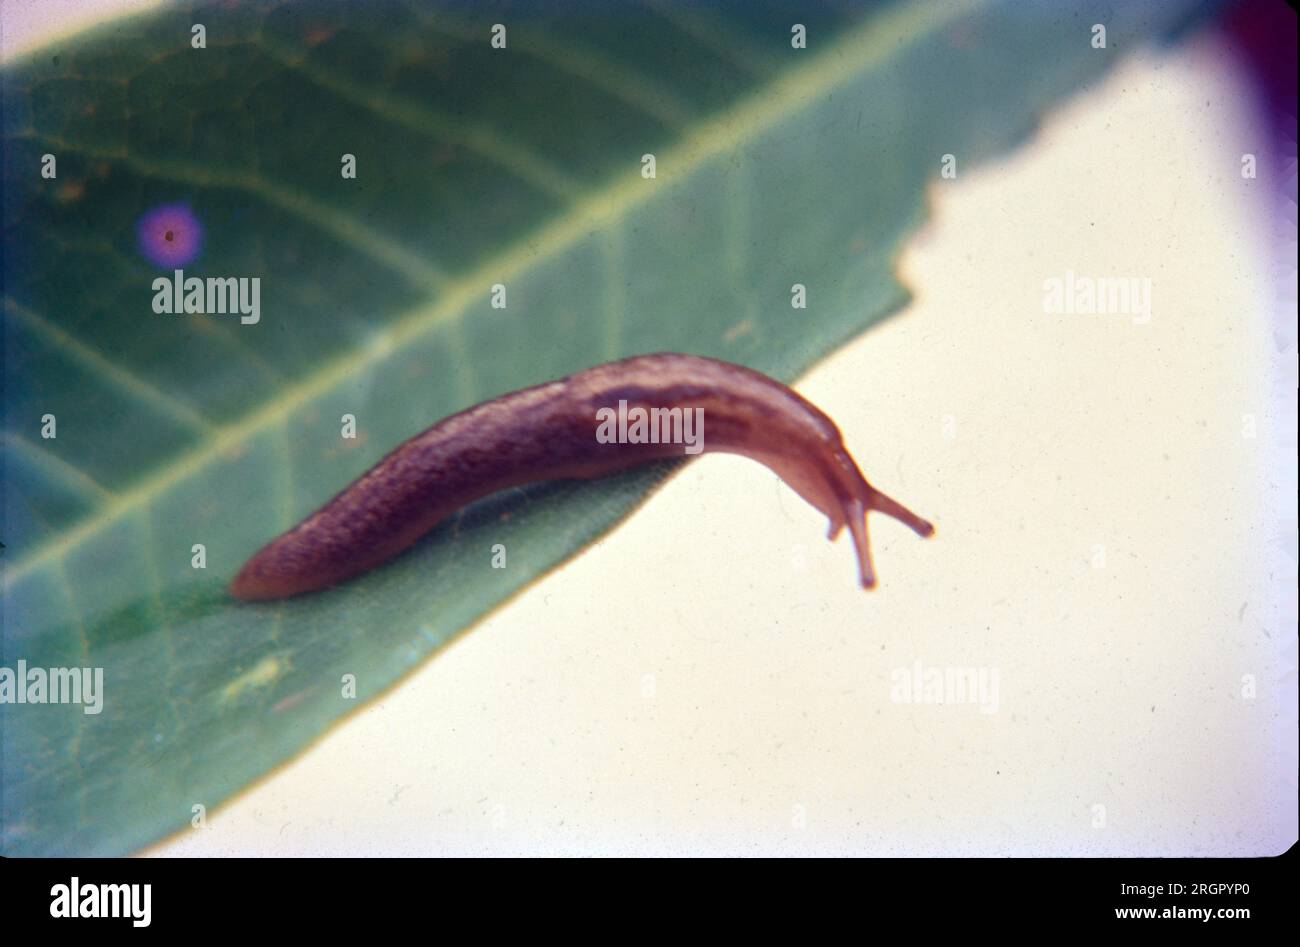 Leeches are segmented parasitic or predatory worms that comprise the subclass Hirudinea within the phylum Annelida. They are closely related to the oligochaetes, which include the earthworm, and like them have soft, muscular segmented bodies that can lengthen and contract. Stock Photo